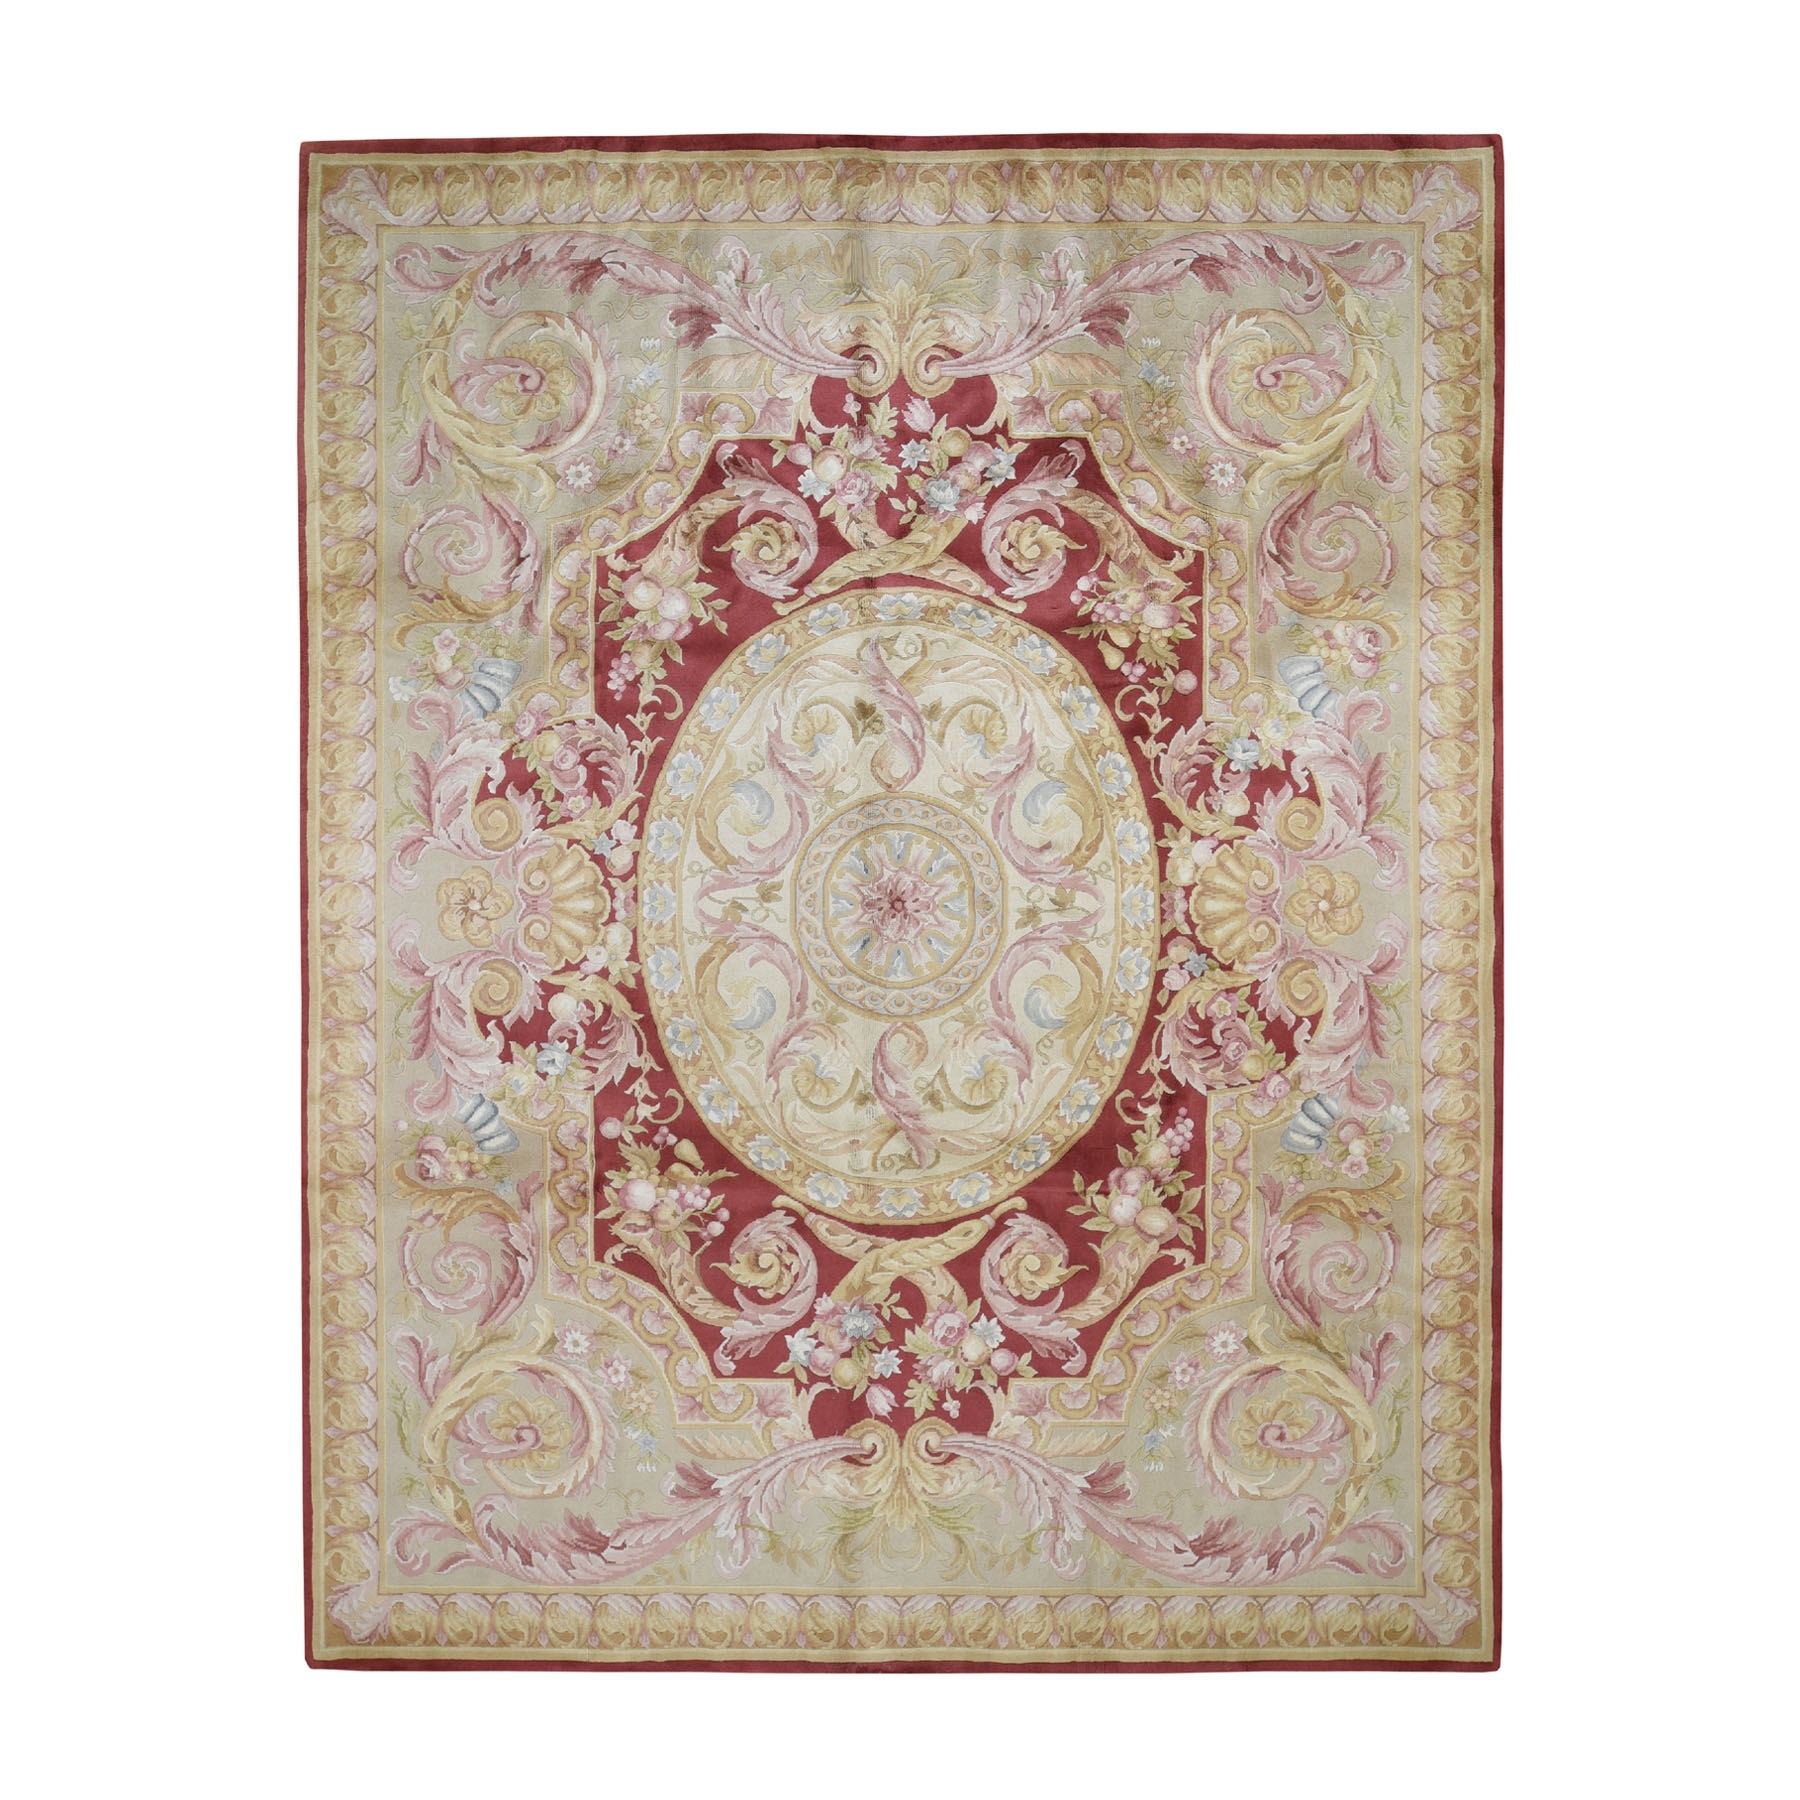 8'x10' Hand Woven Thick And Plush Savonnerie Napoleon III Design Oriental Rug 